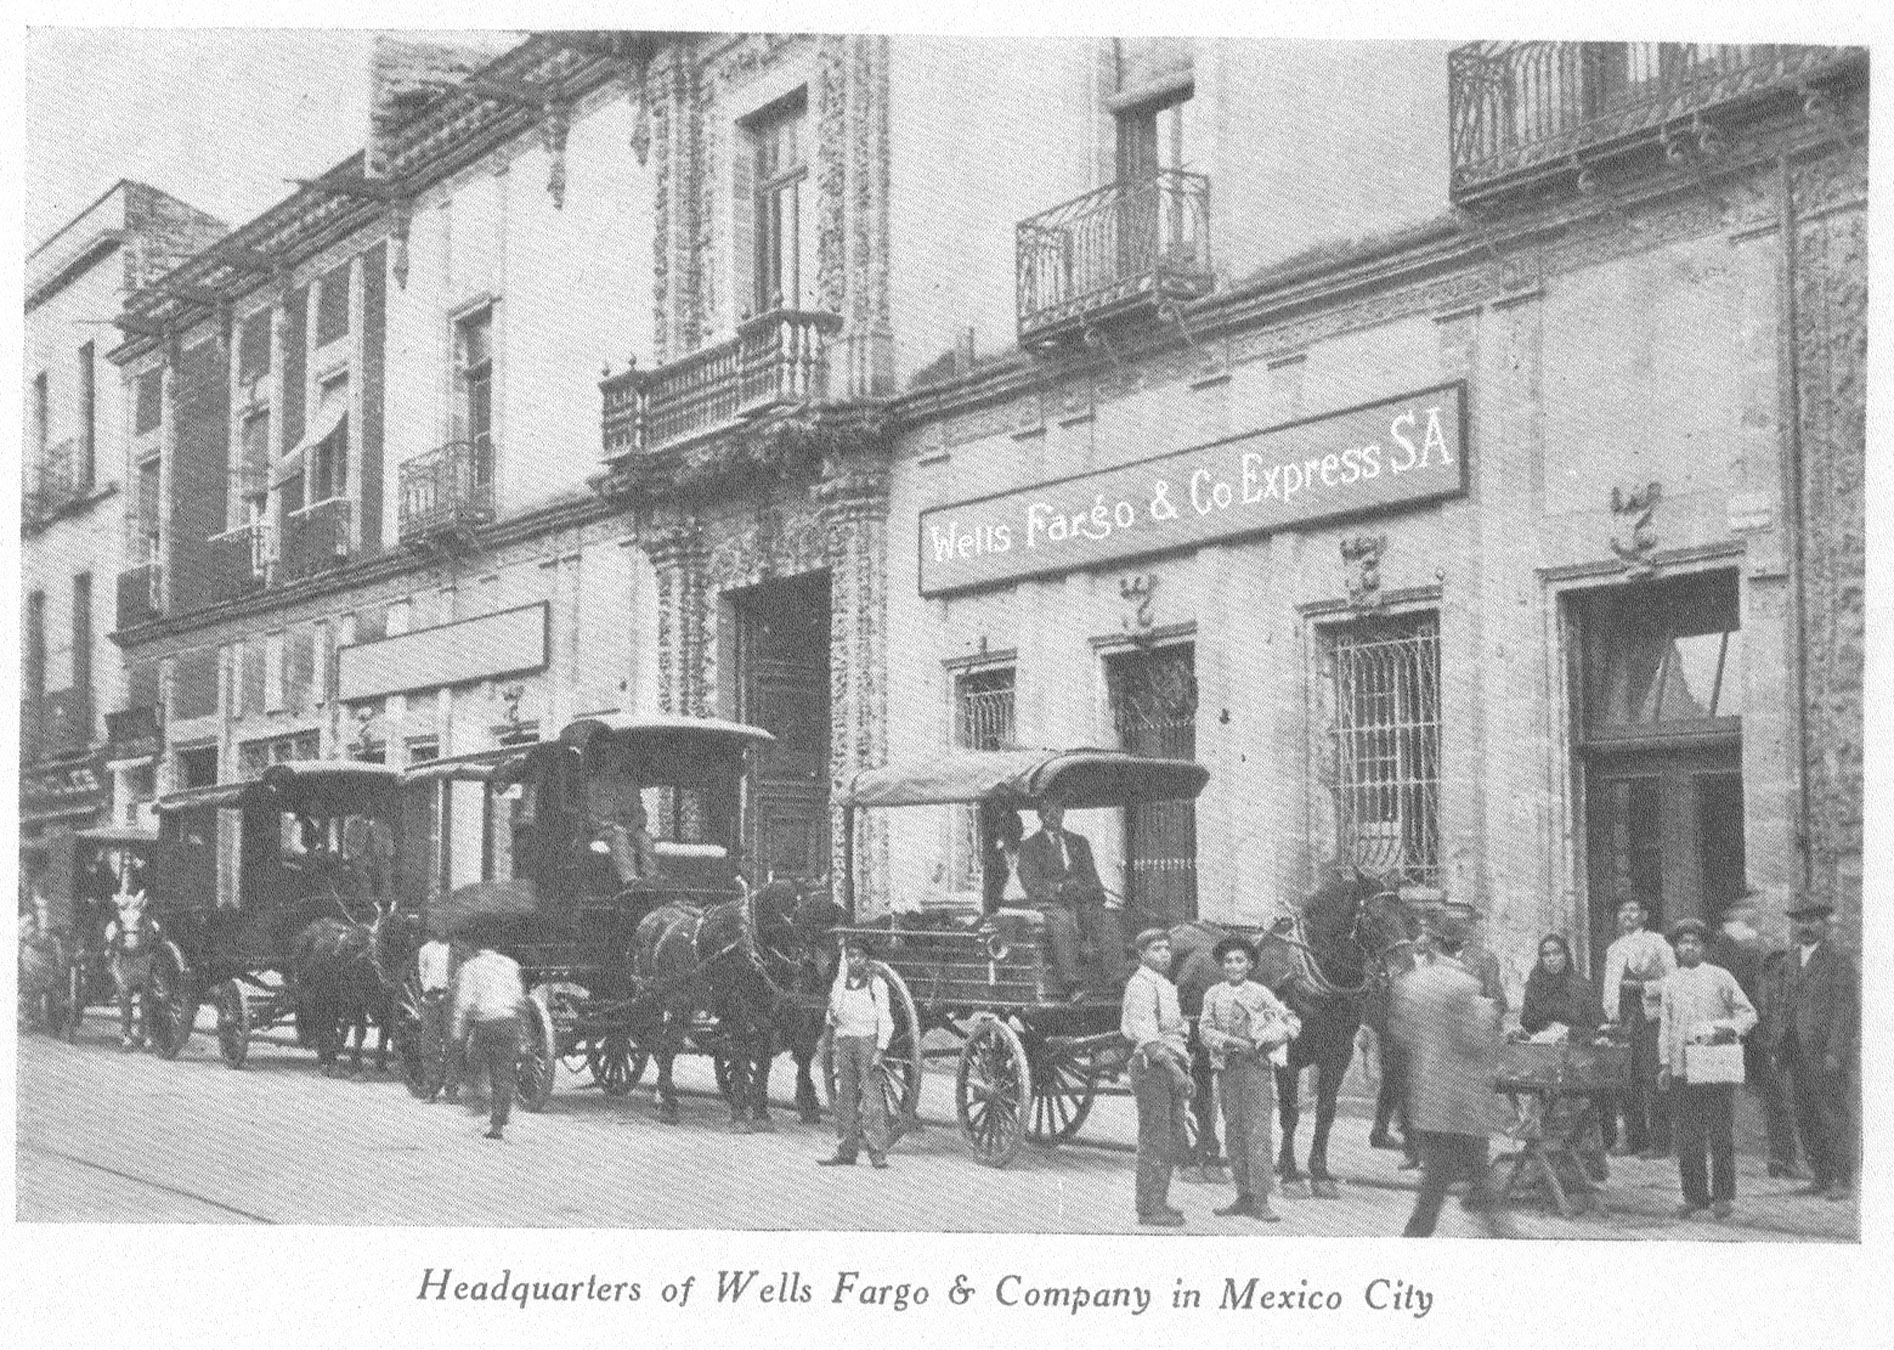 A black-and-white photo shows wagons with horses in a line outside of a row of buildings. People stand nearby on the street, and a building has a Wells Fargo & Co Express SA sign. Image link will enlarge image.